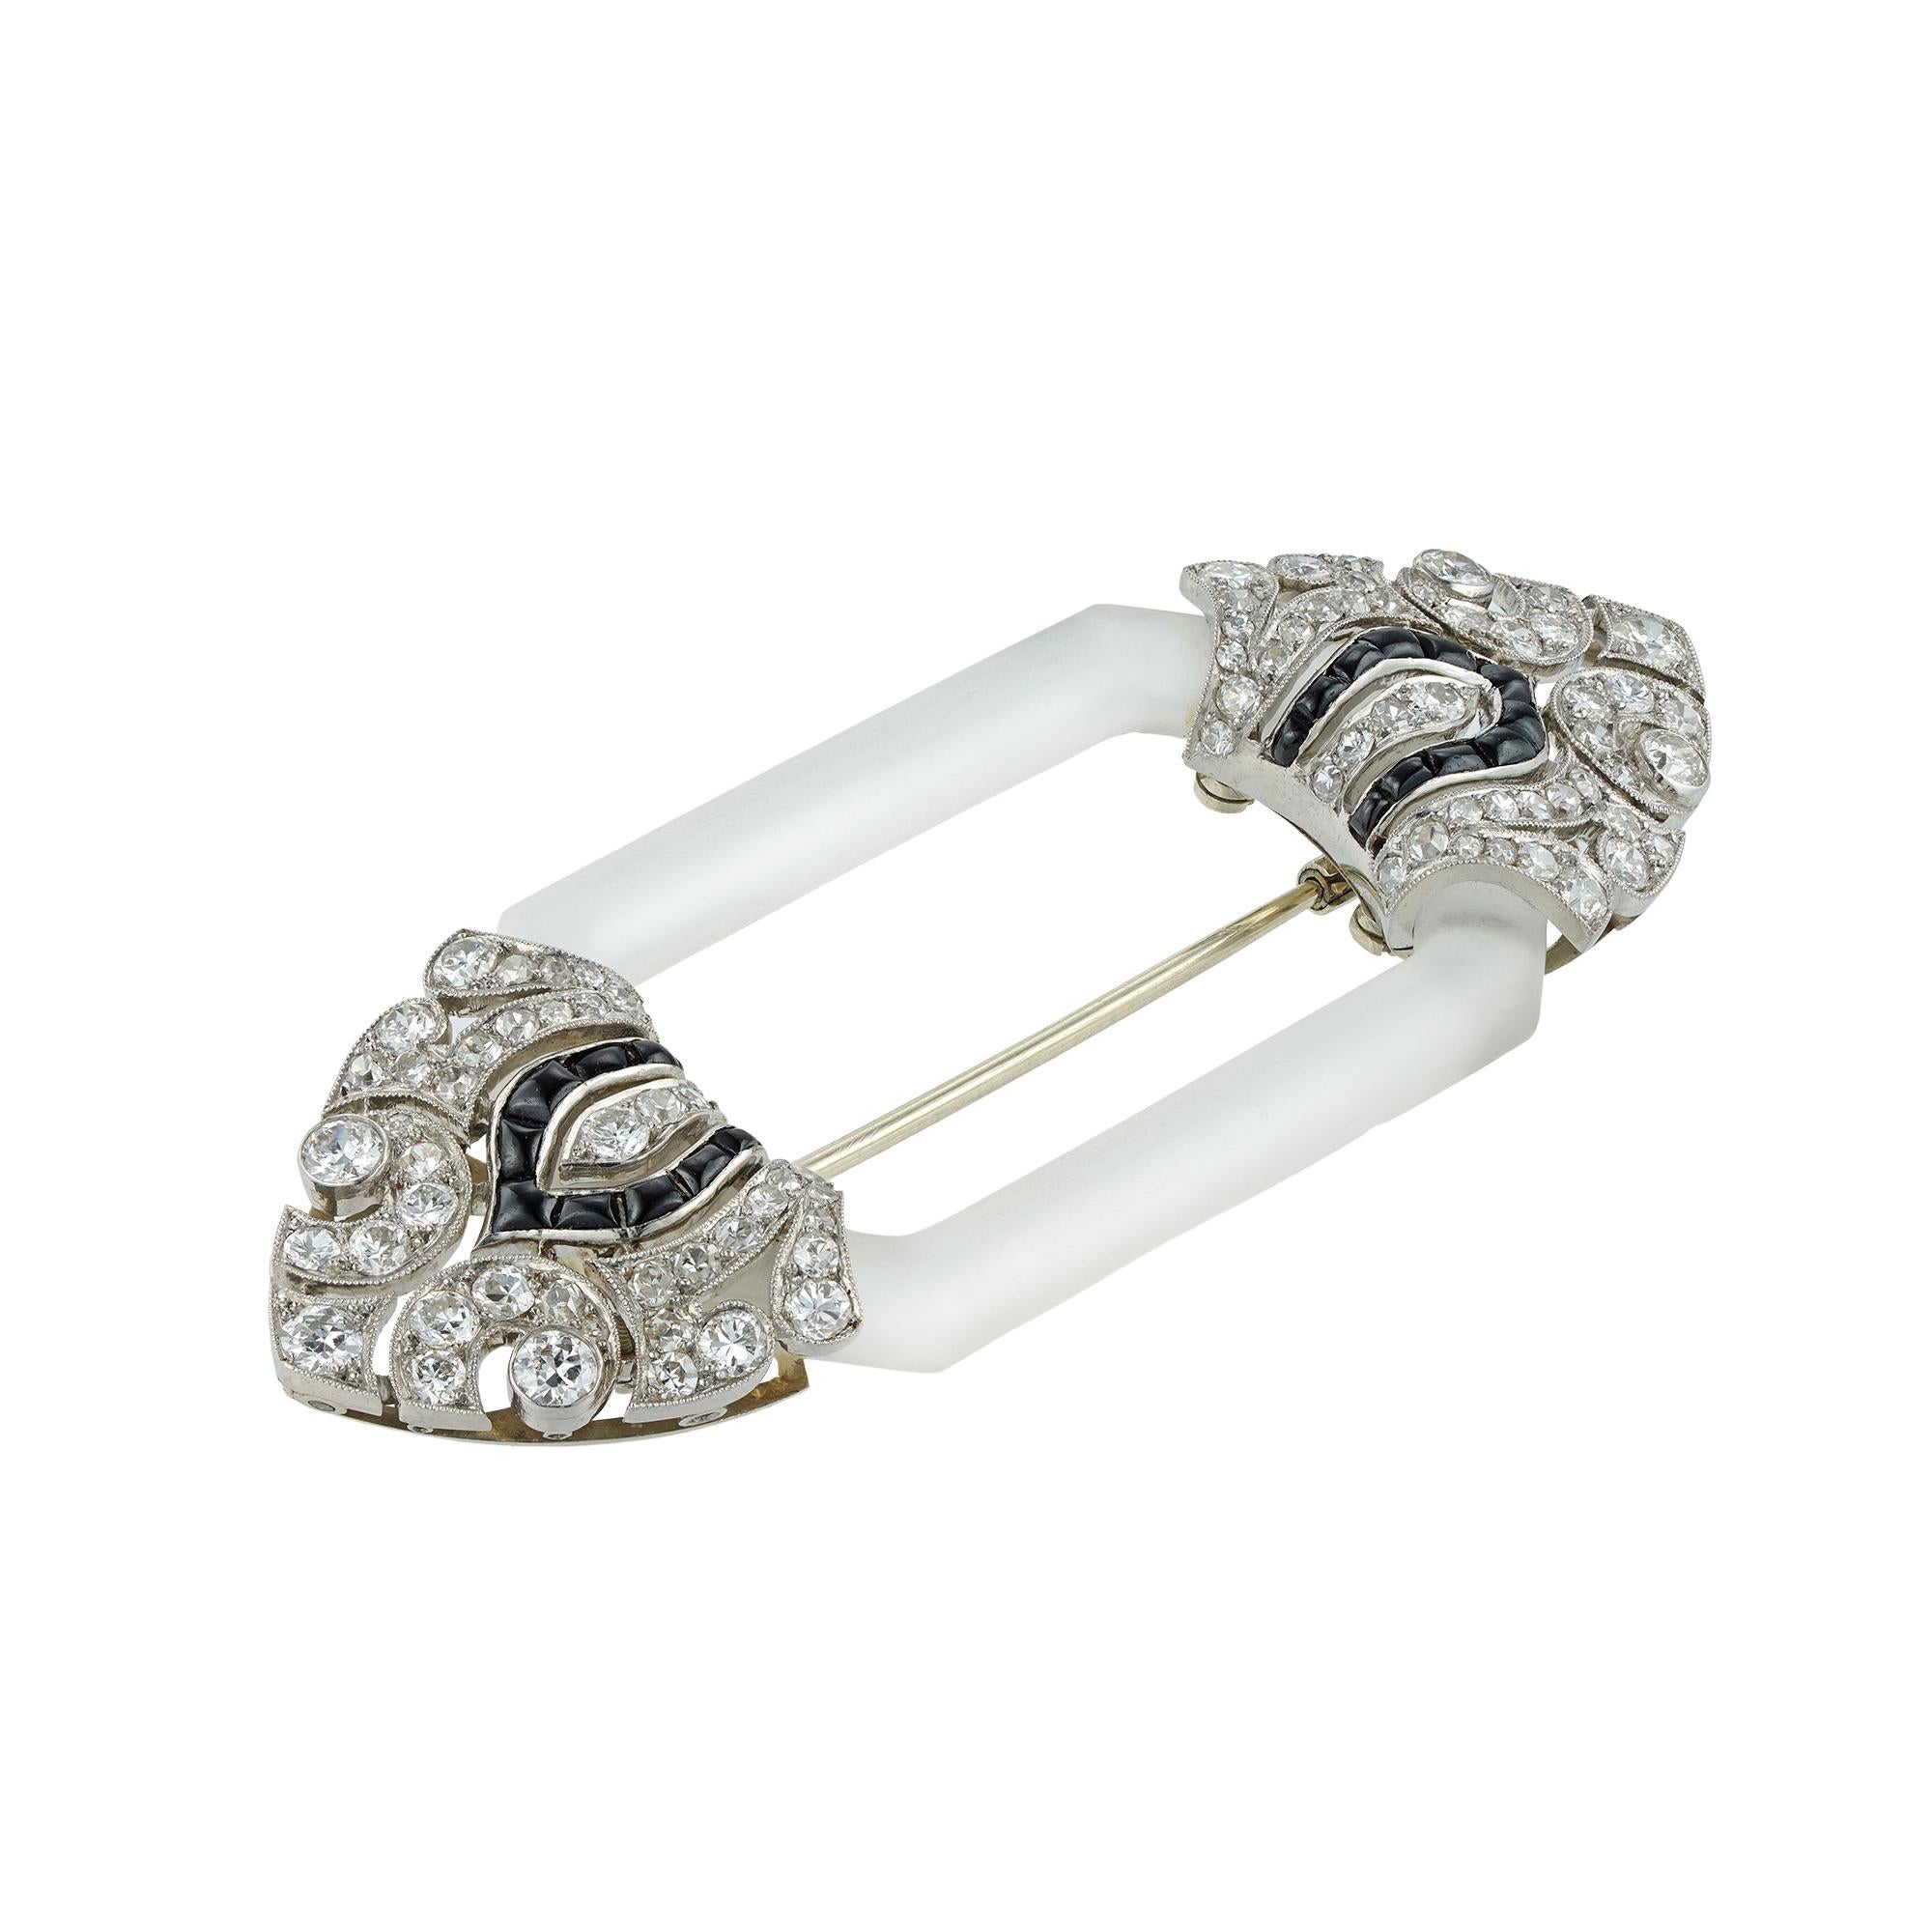 A French Art Deco crystal, diamond and onyx brooch by Chaumet, consisting of an octagonal-shaped frosted rock crystal frame, mounted between two finials of palmette design, with diamond-set scroll Mughal style decorations, accented by a line of